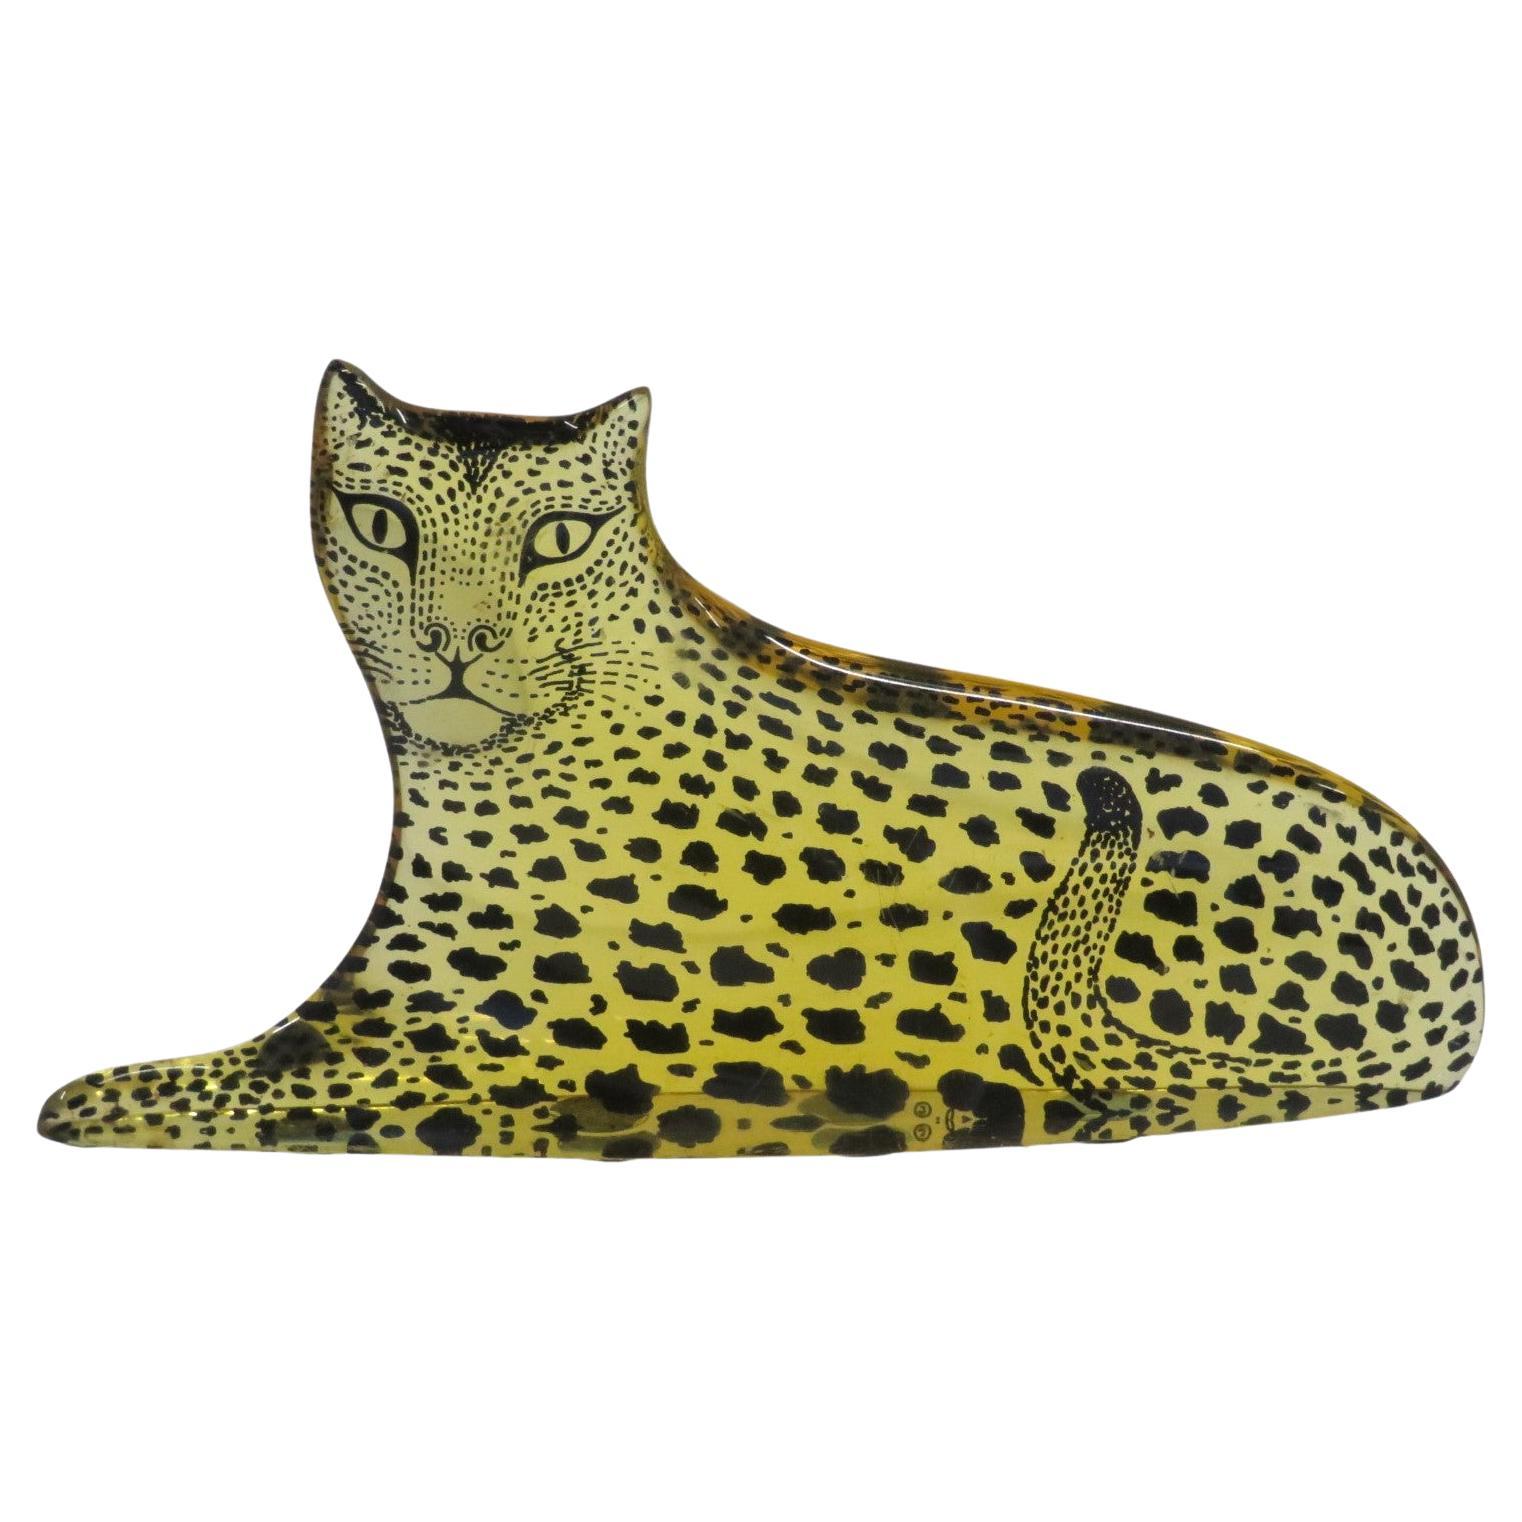 Lucite Leopard Sculpture by Abraham Palatnik Brazil from the Artemis Collection